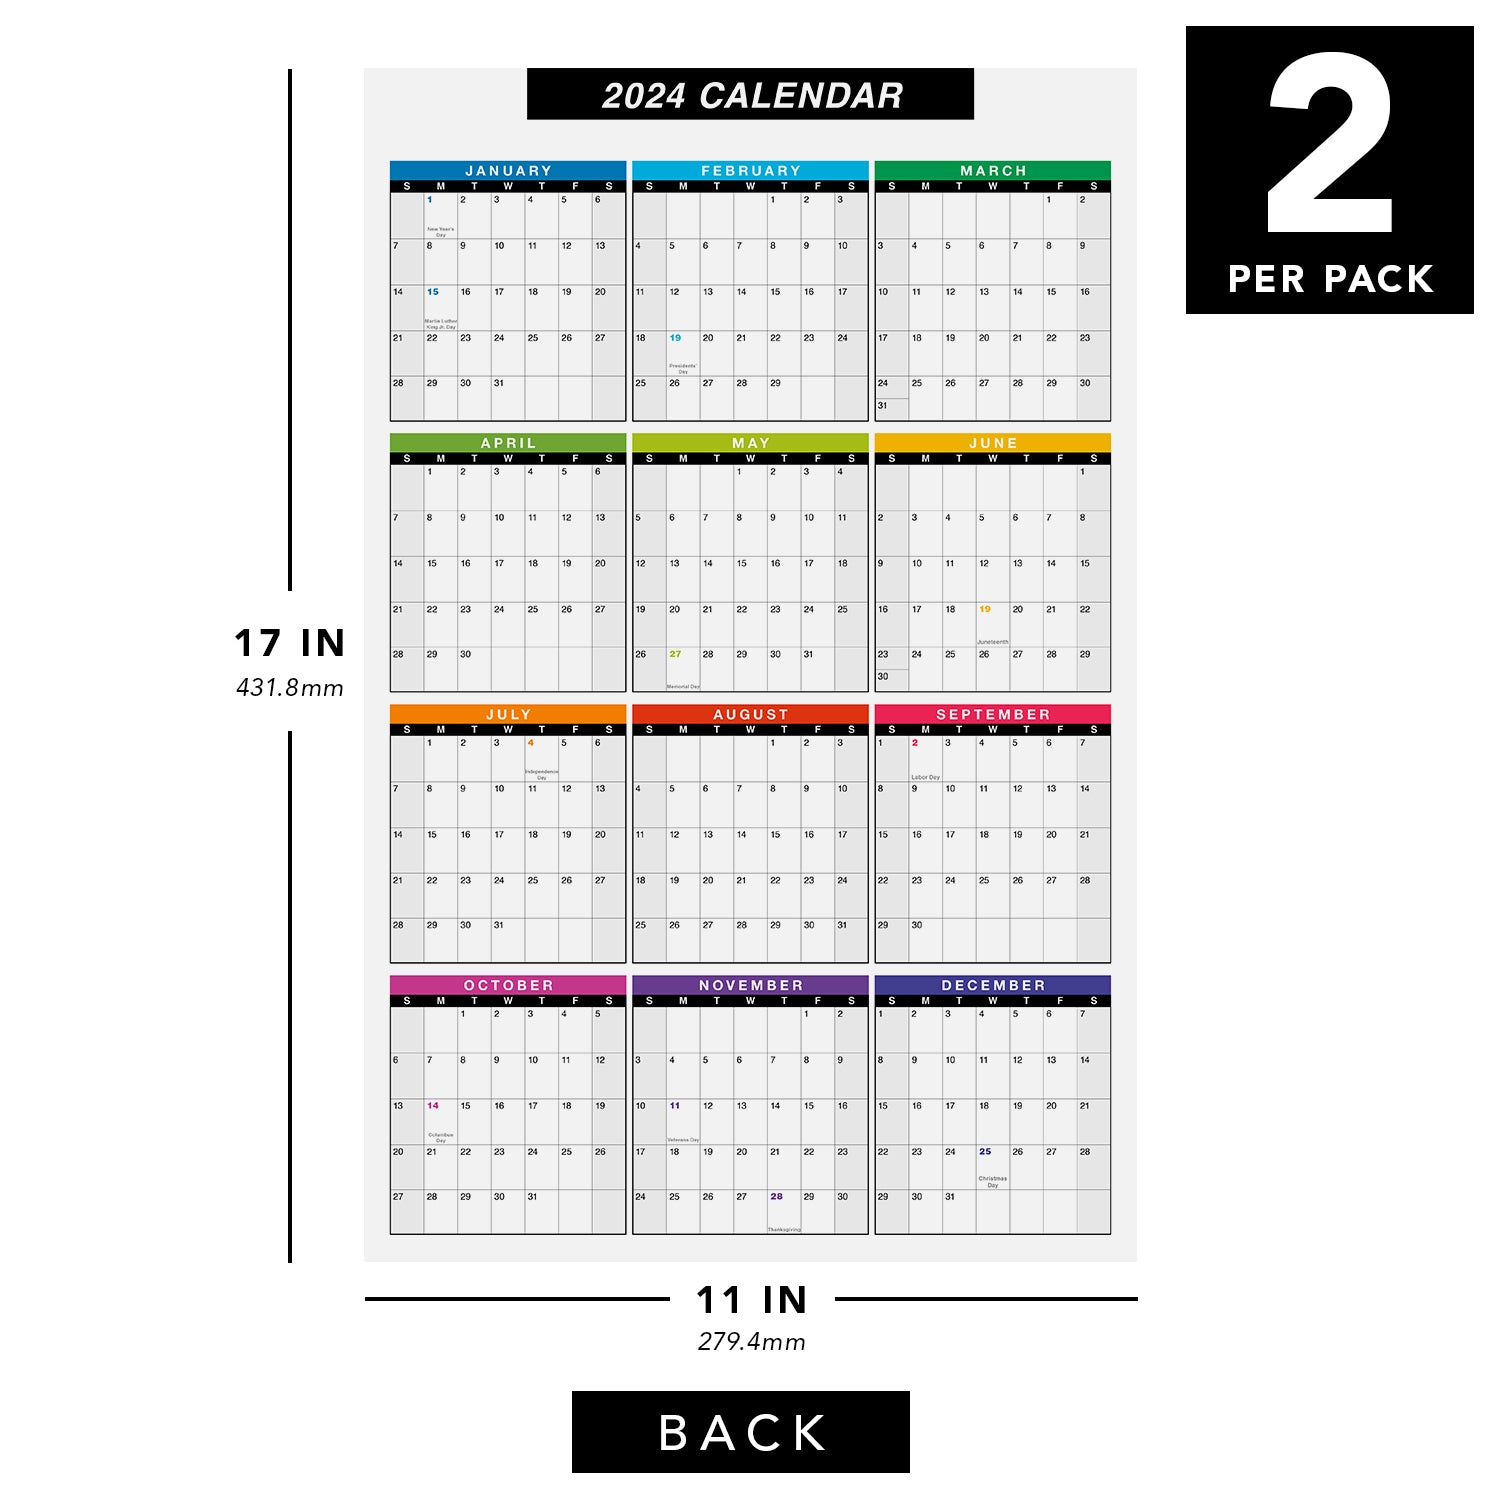 2024 Full Desk Calendar - 11 x 17” Large Size 2 Sided Vertical/Horizontal Reversible - Printed on Thick and Durable 80lb Cardstock (216 GSM) 2 per pck